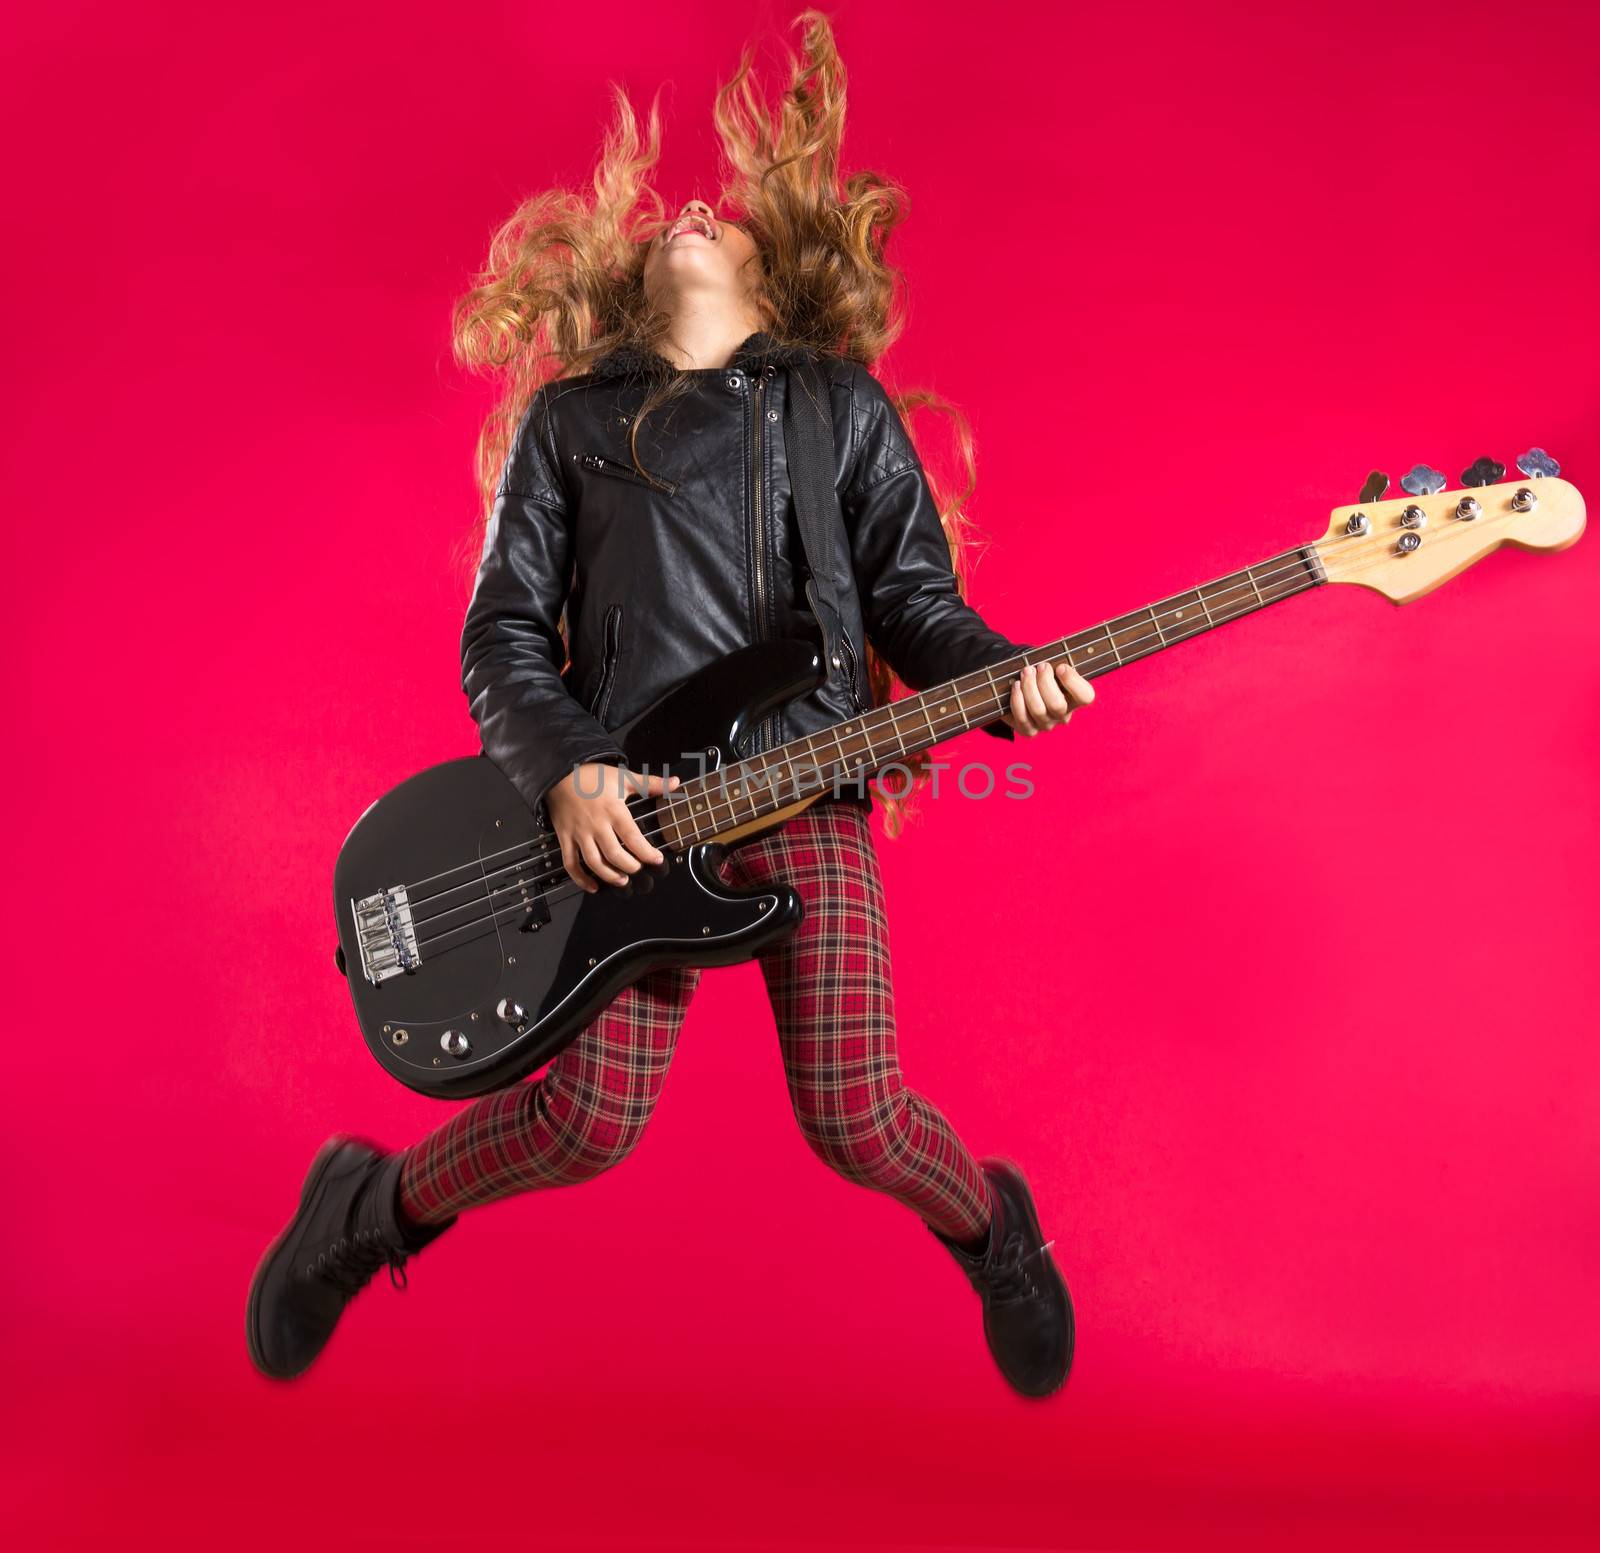 Blond Rock and roll girl jumping playing bass guitar on red background